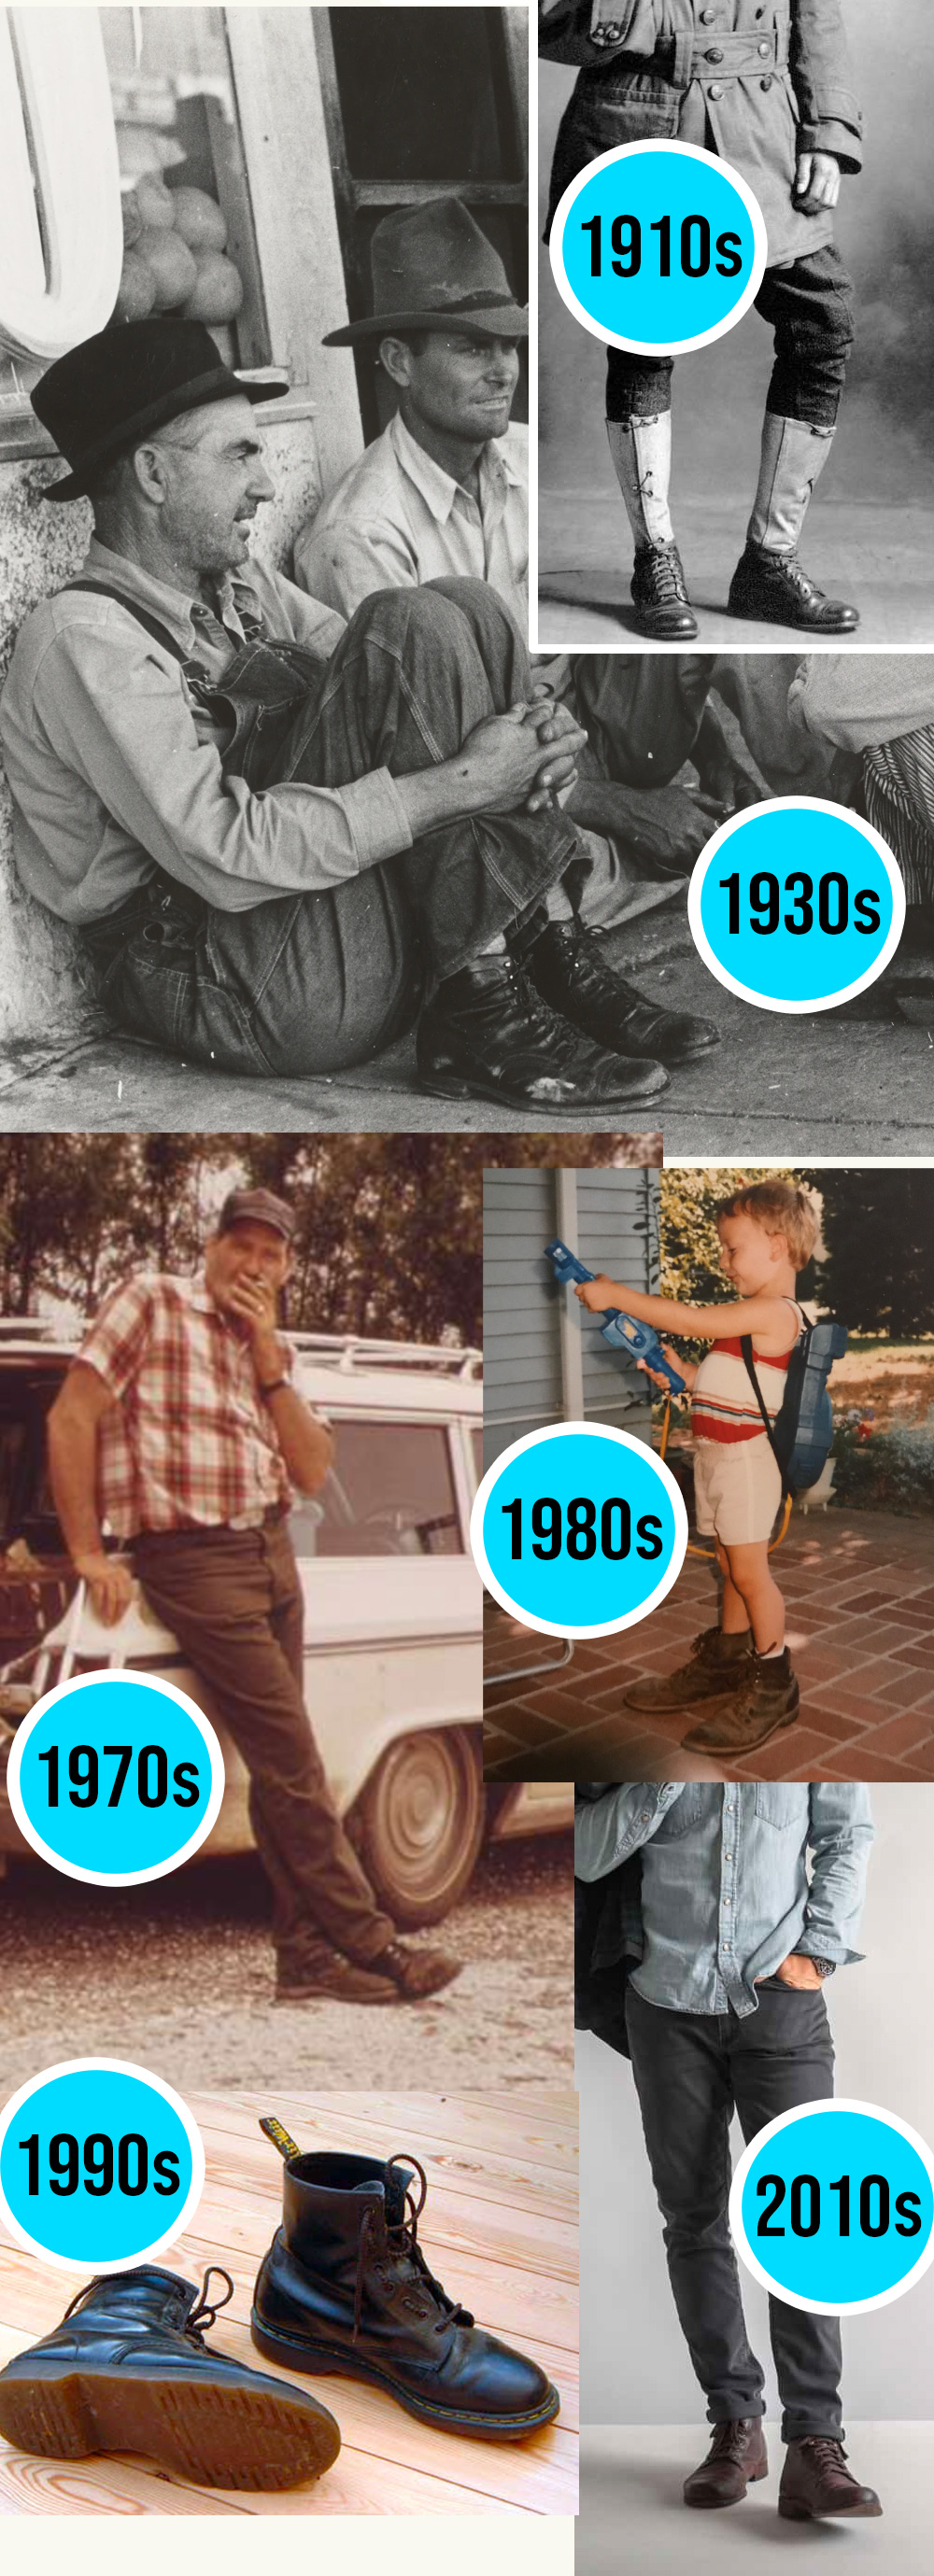 boot shapes timeline with photos of boots from 1910s, 1930s, 1970s, 1980s, 1990s, and 2010s